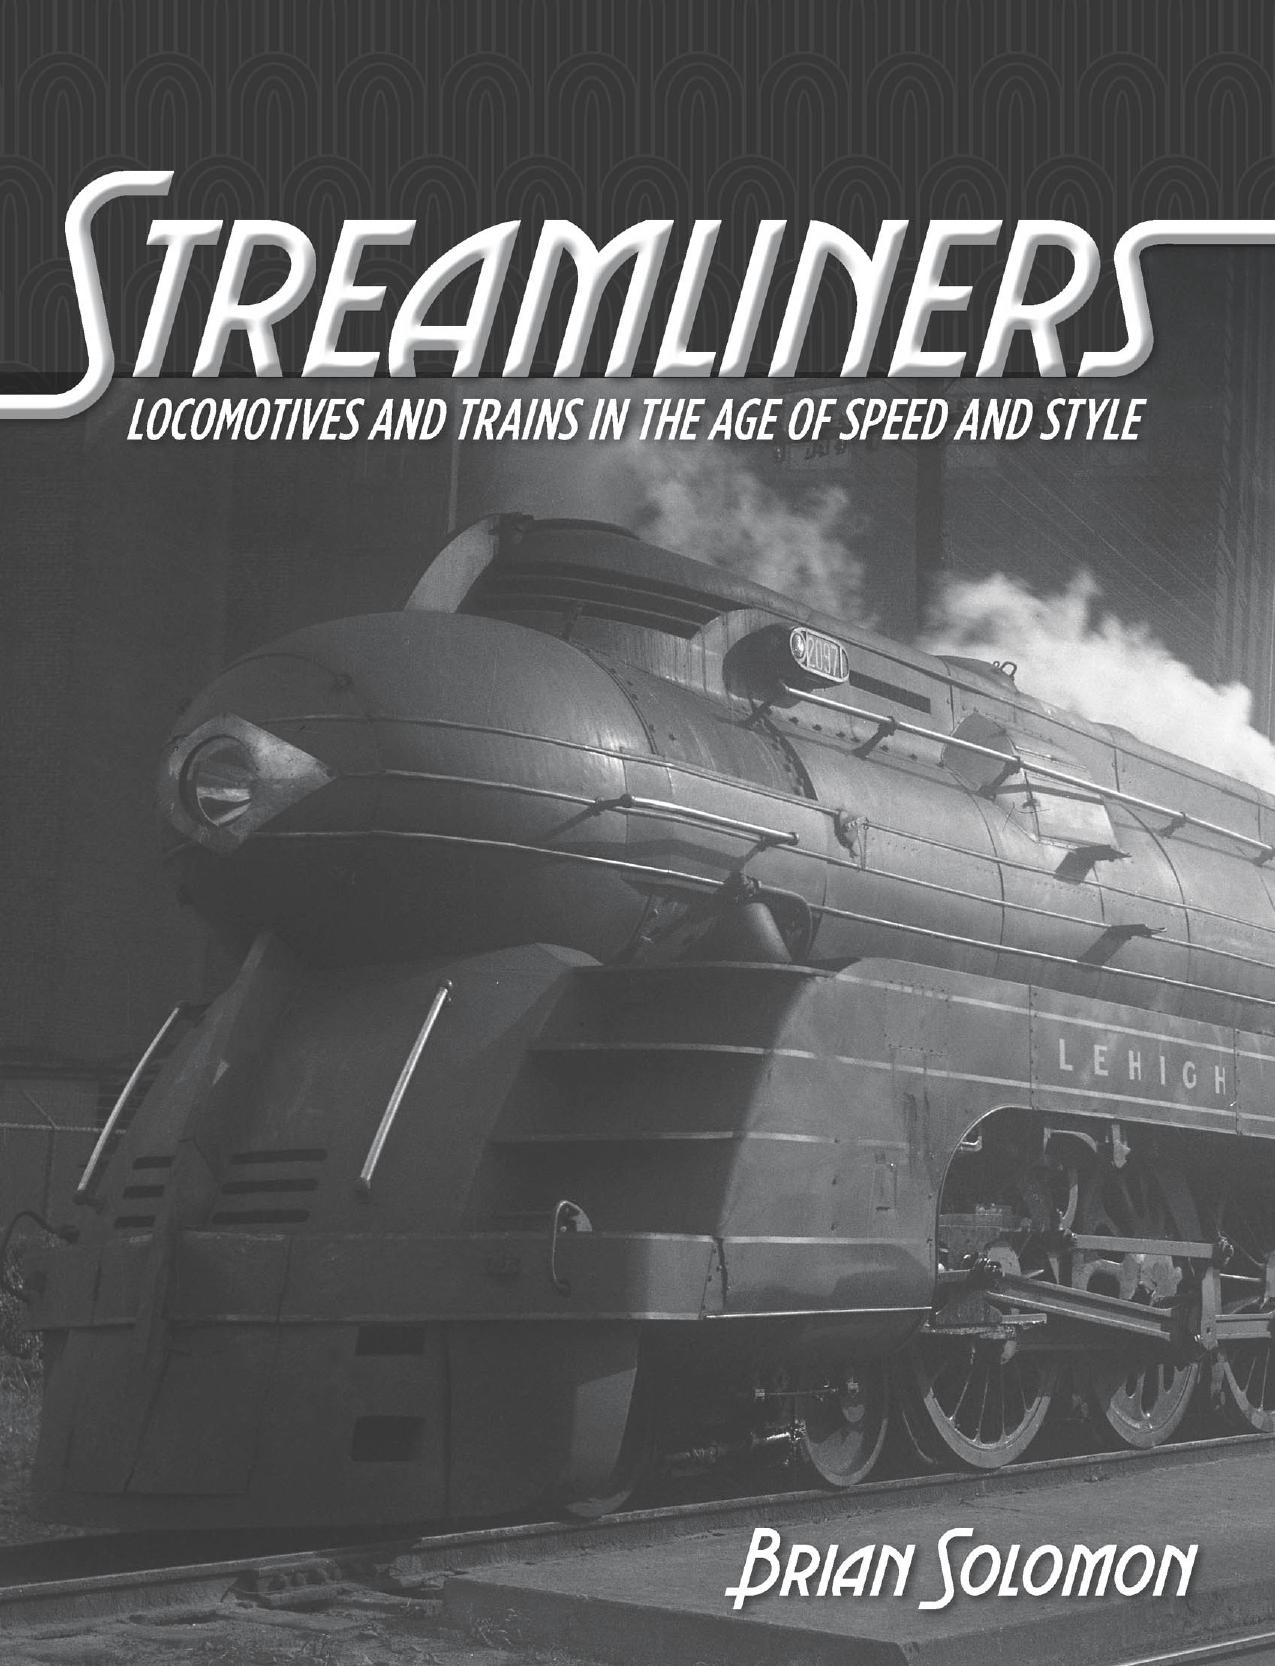 Streamliners: Locomotives and Trains in the Age of Speed and Style by Brian Solomon